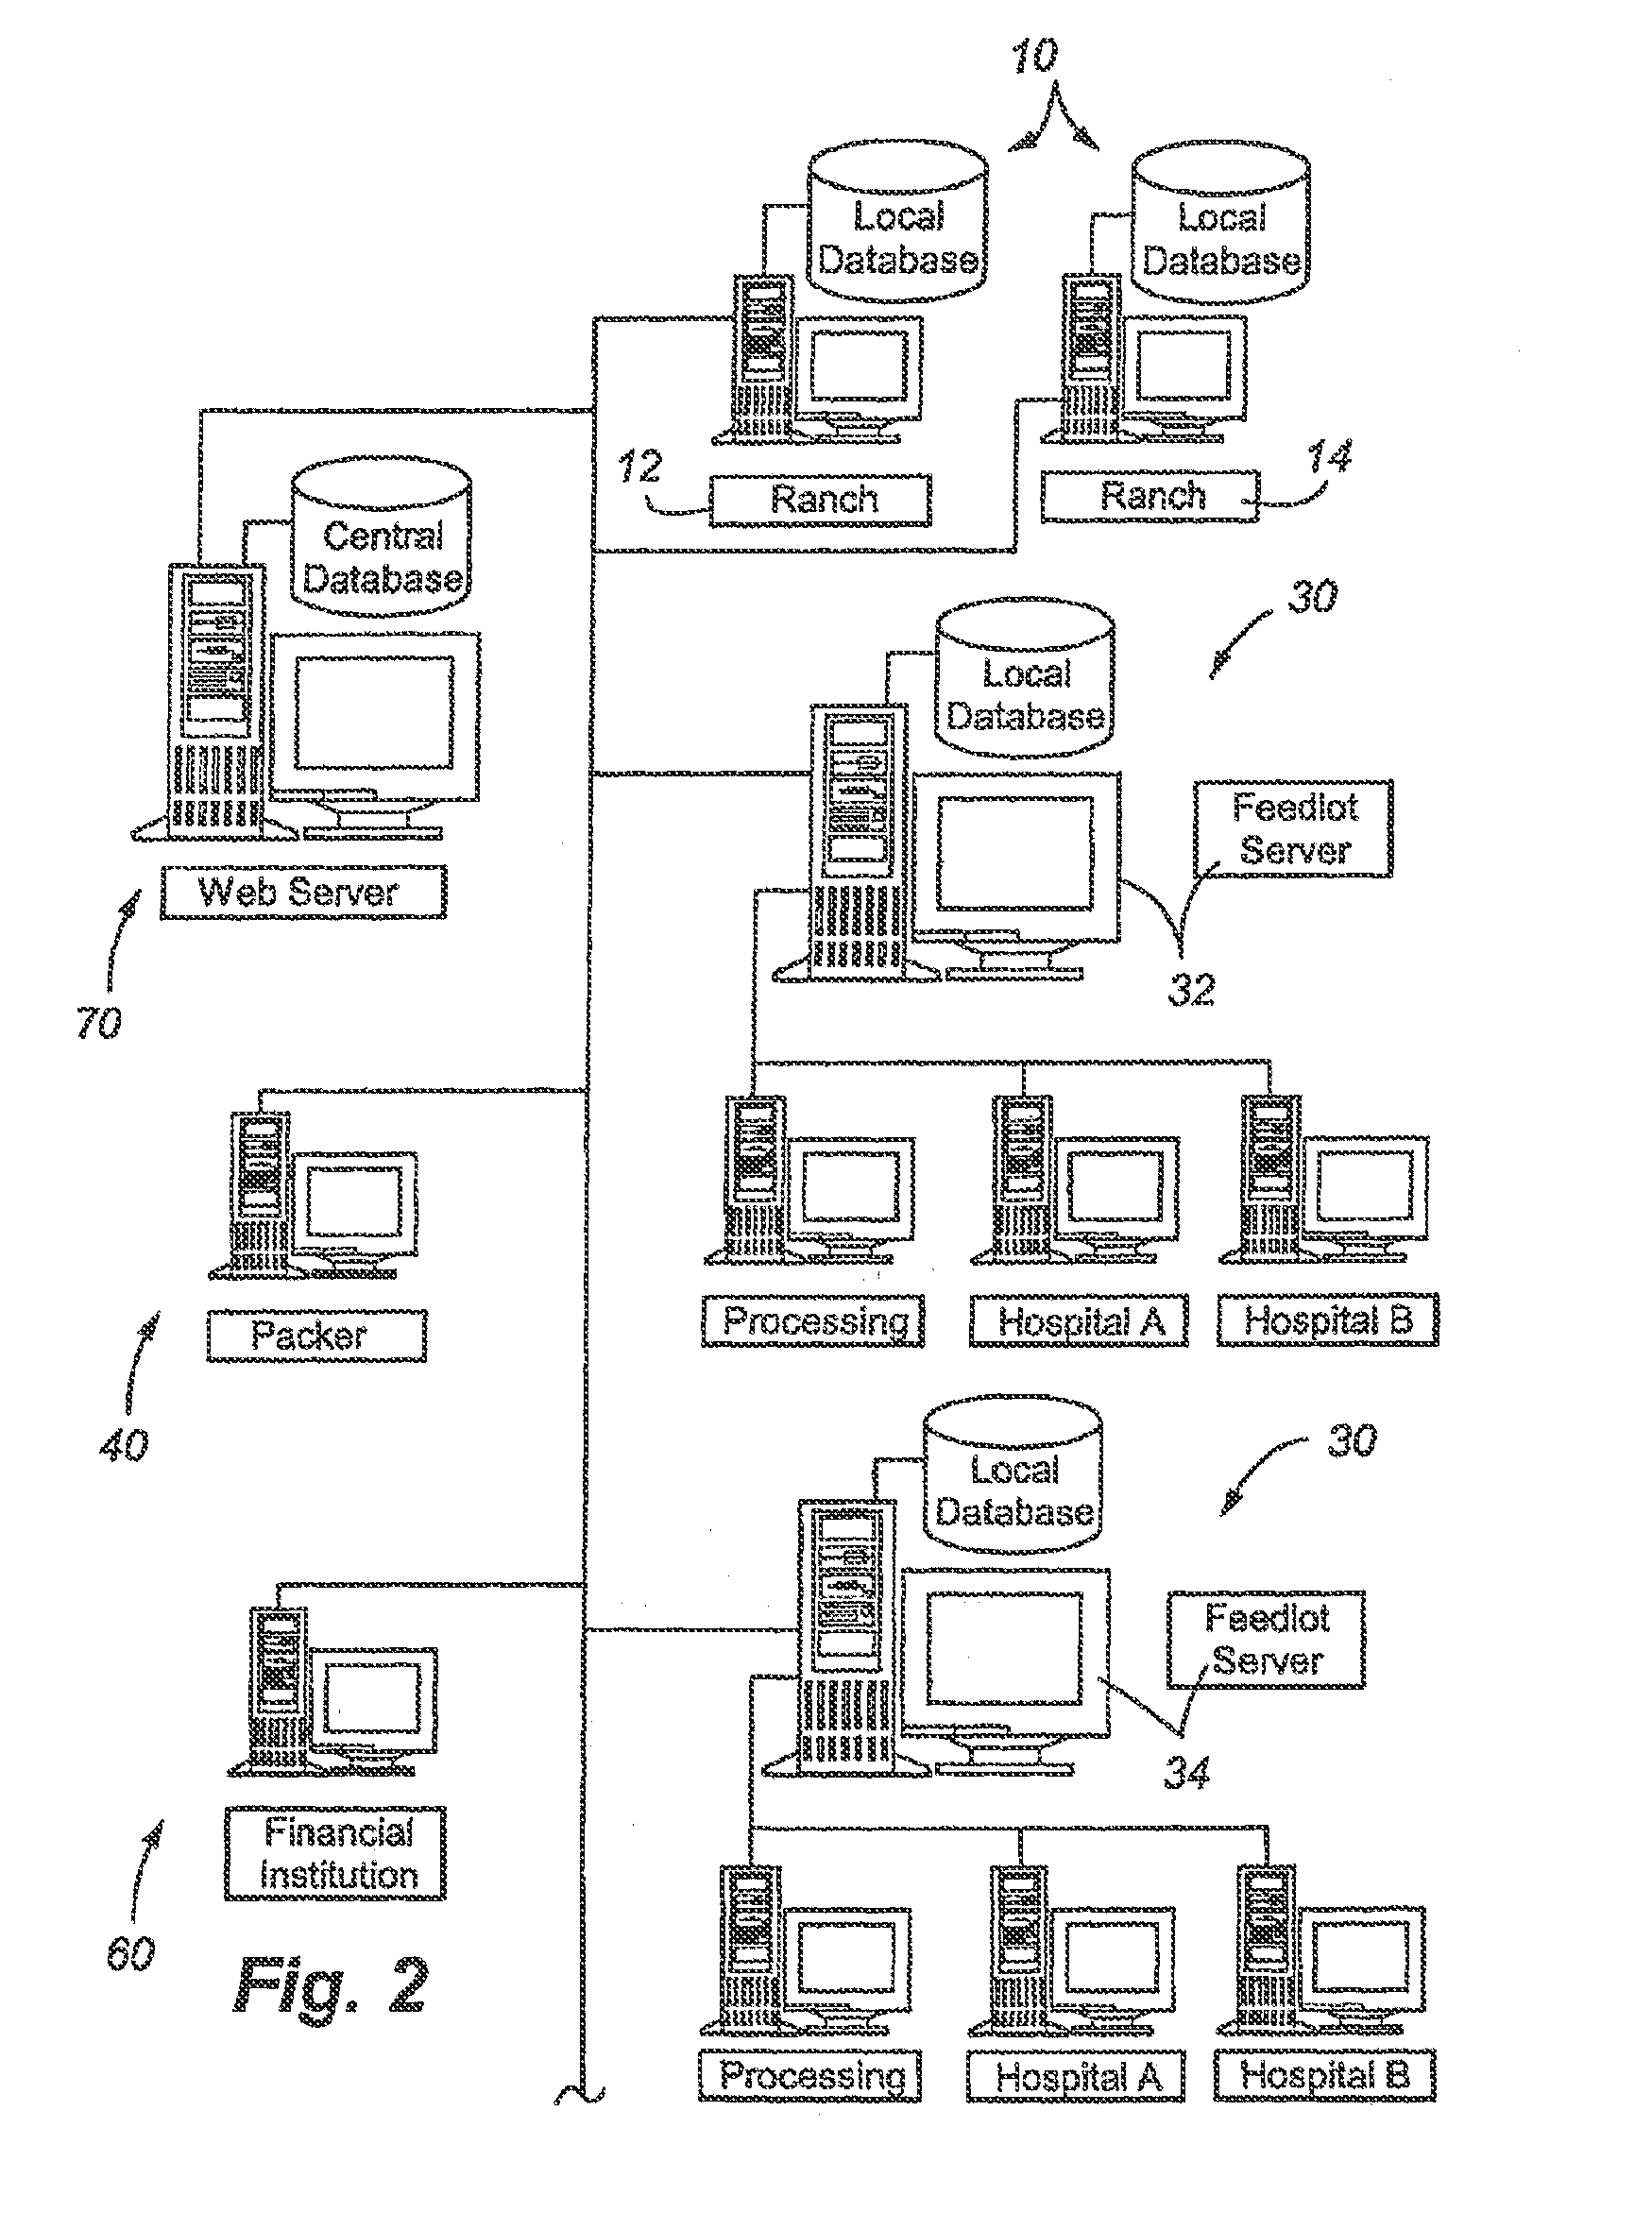 System and method for control of commodities inventory for animal feed rations